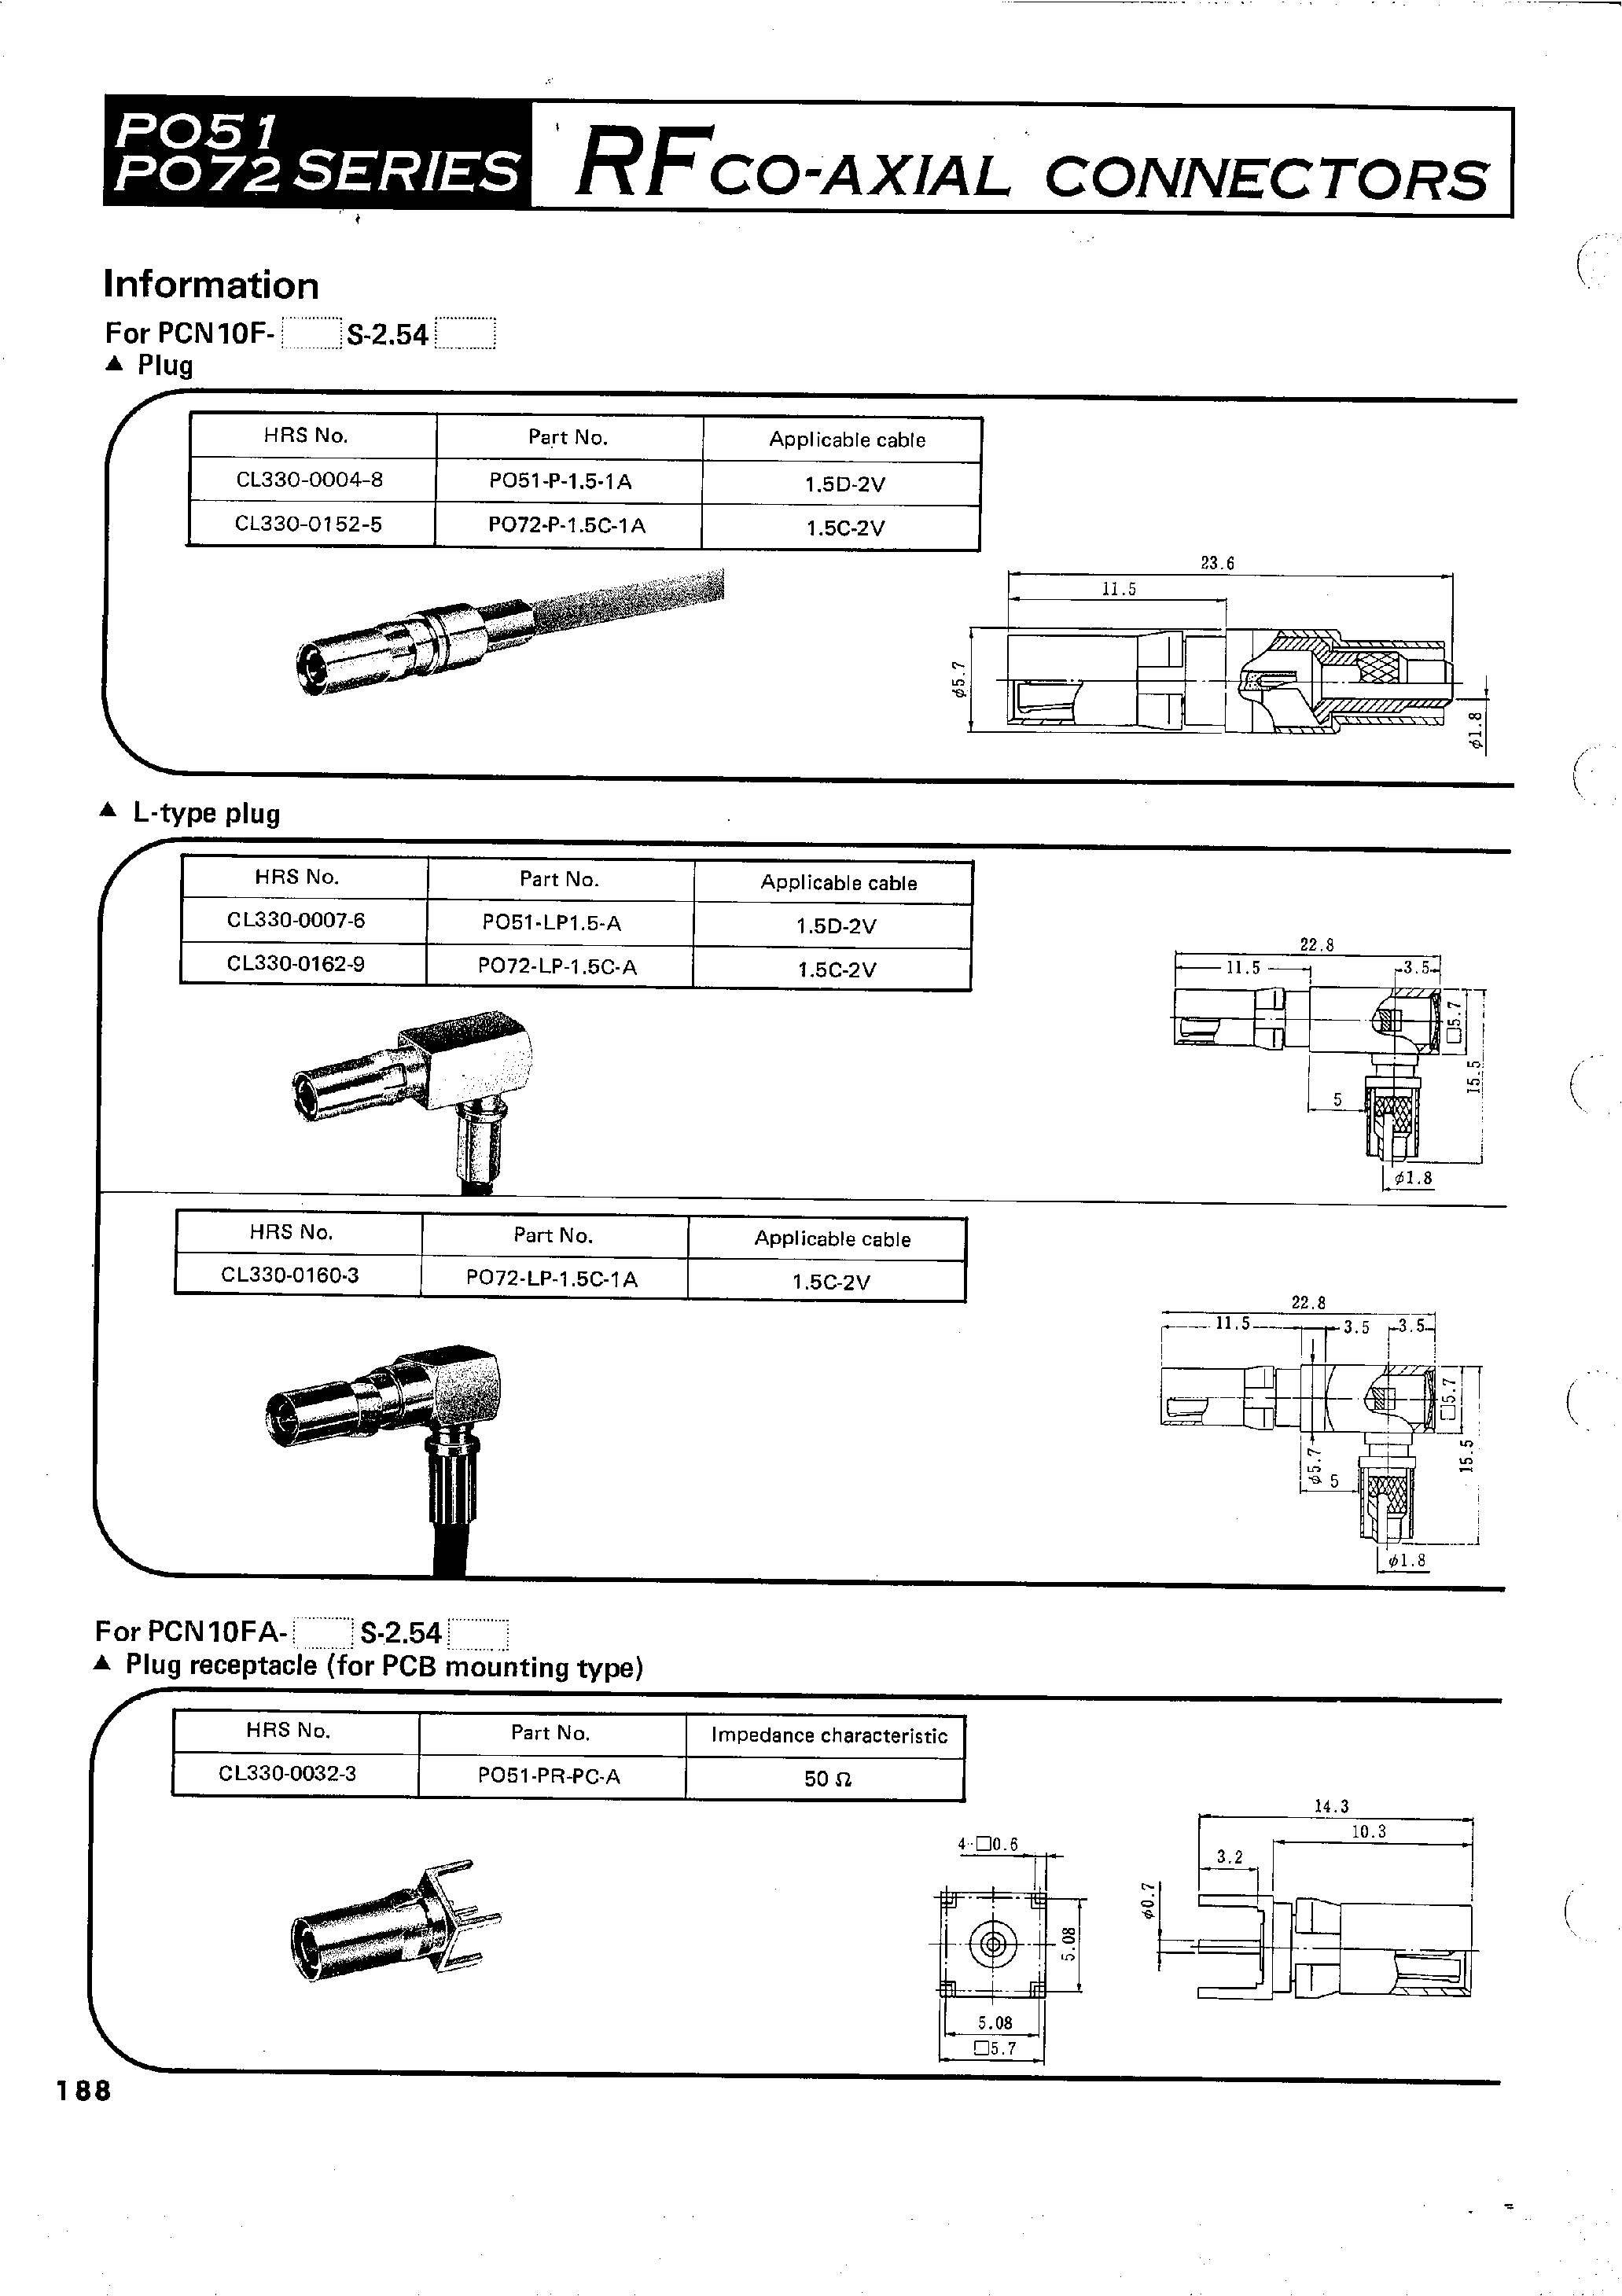 Datasheet PO51P-T-1S - RFCO-AXIAL CONNECTORS page 2